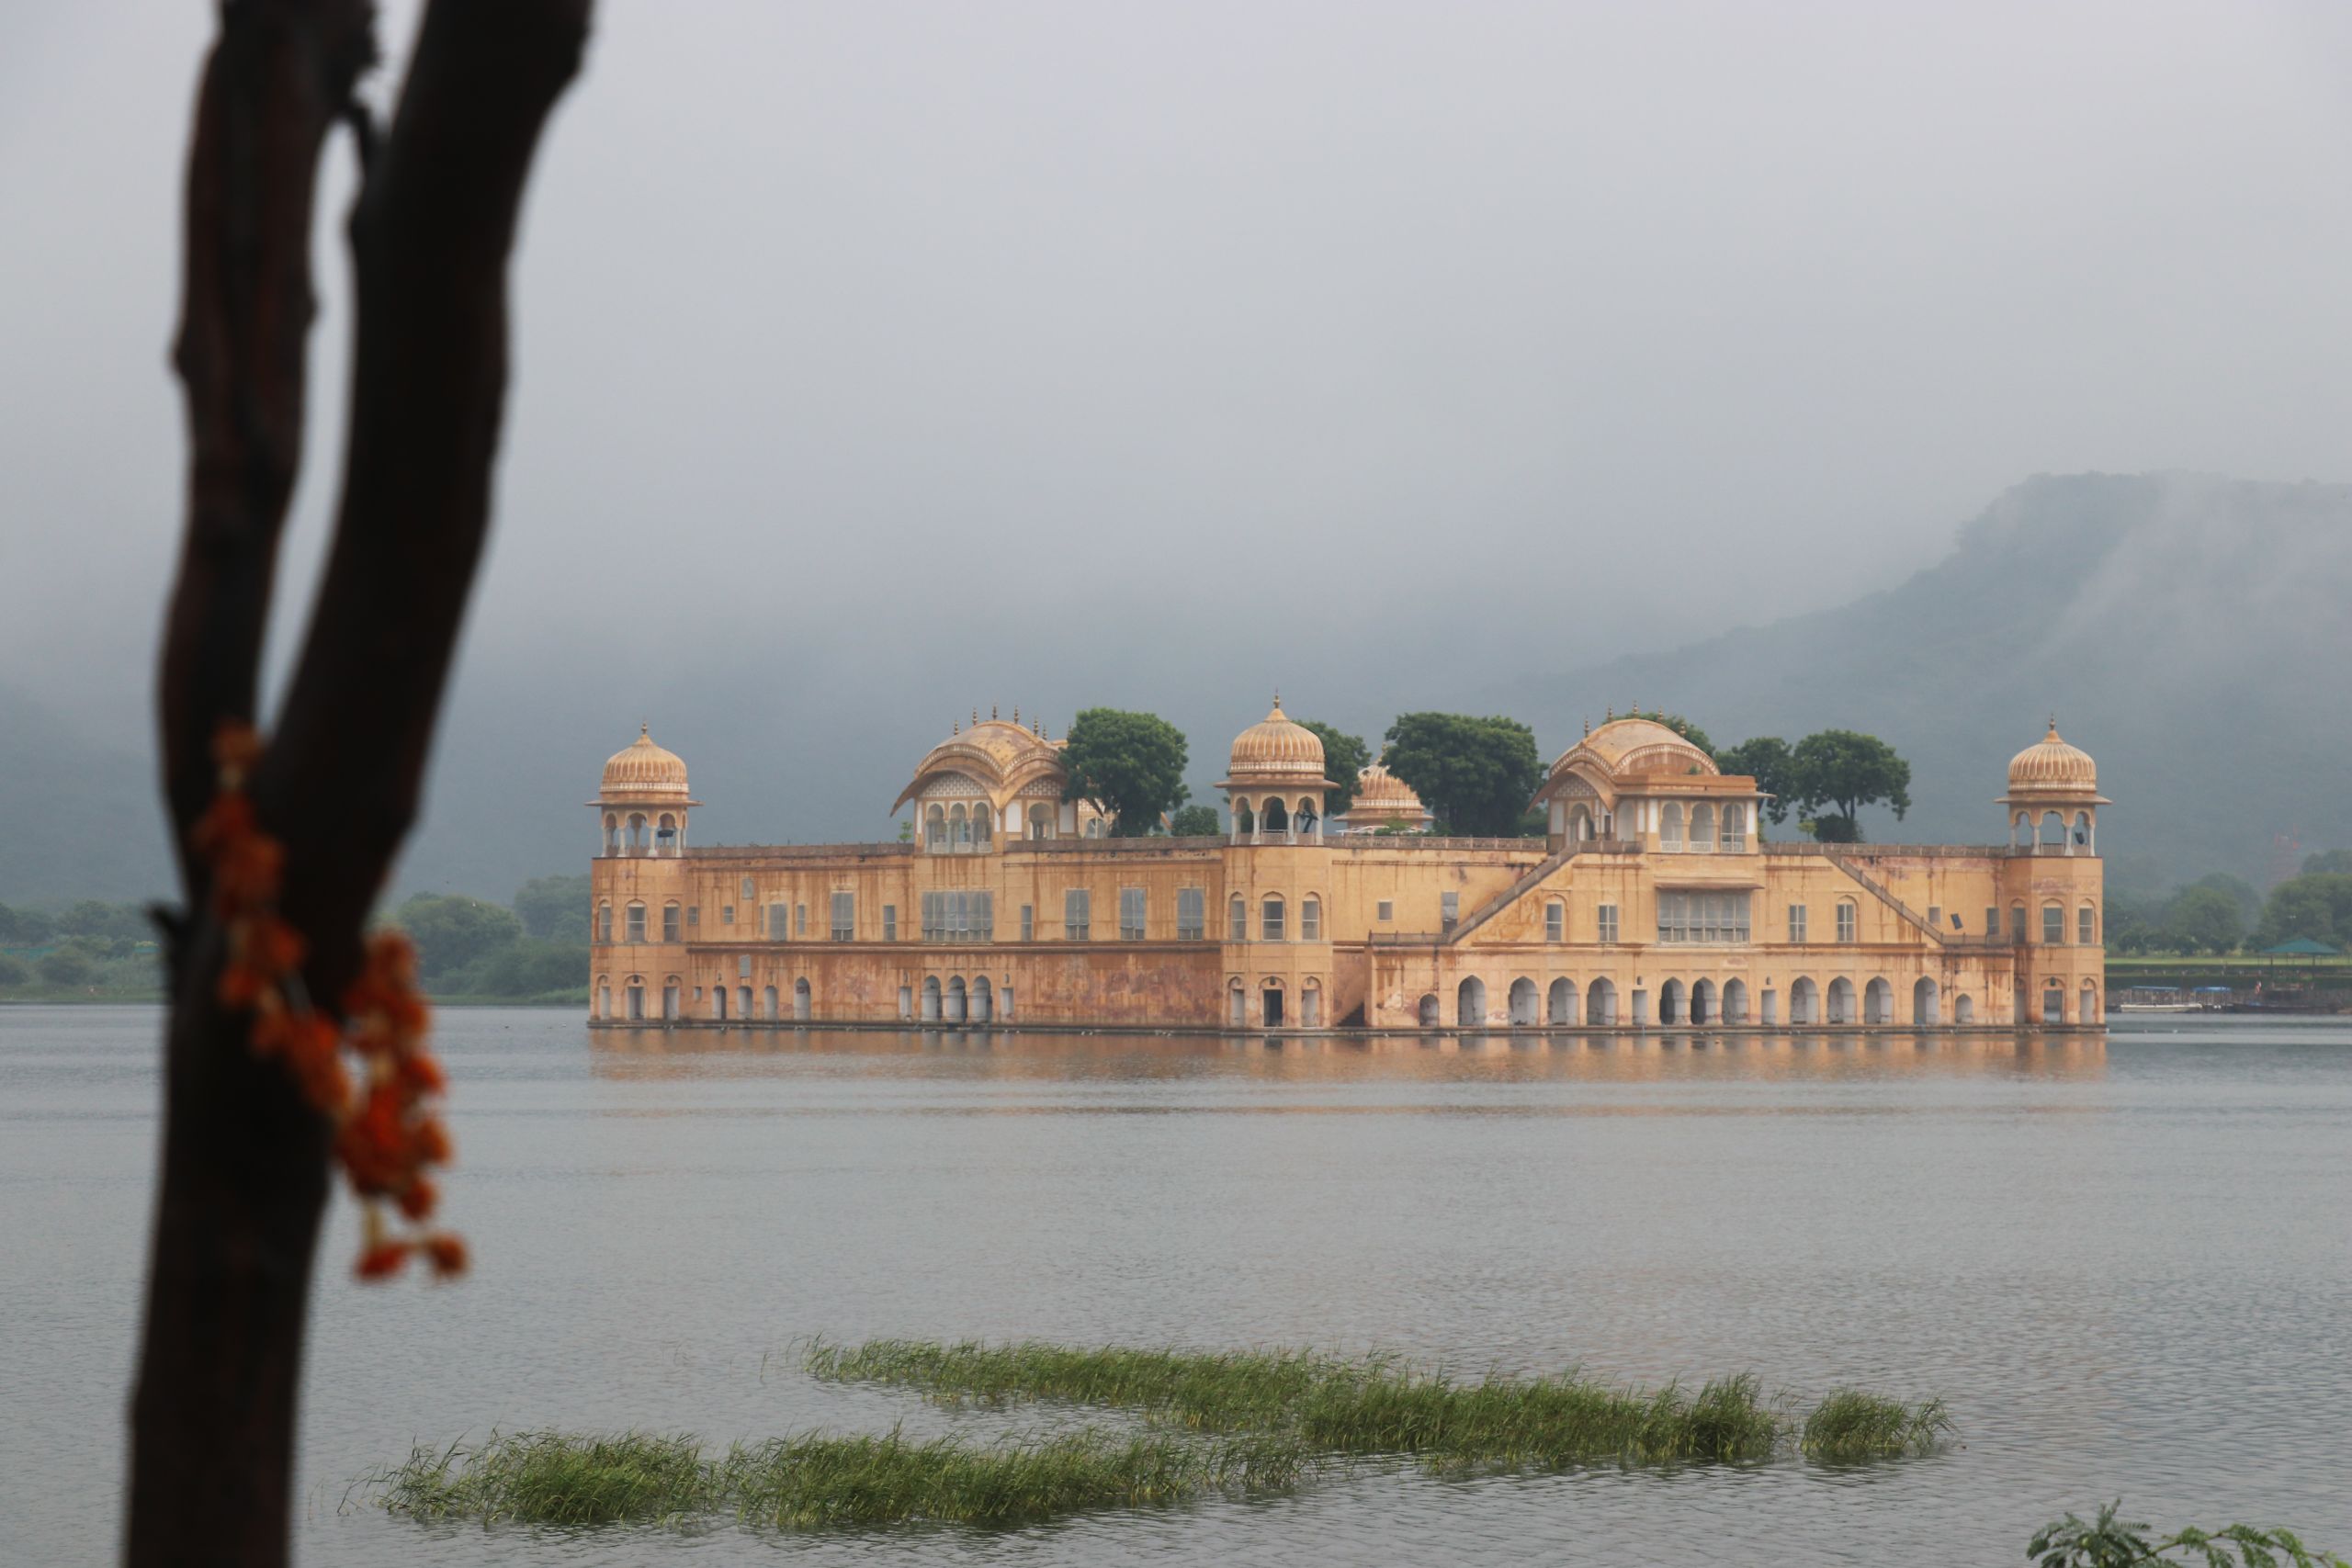 Jal Mahal palace is surrounded by water. A tree with a garland of red hibiscus flowers is in the left of the picture.